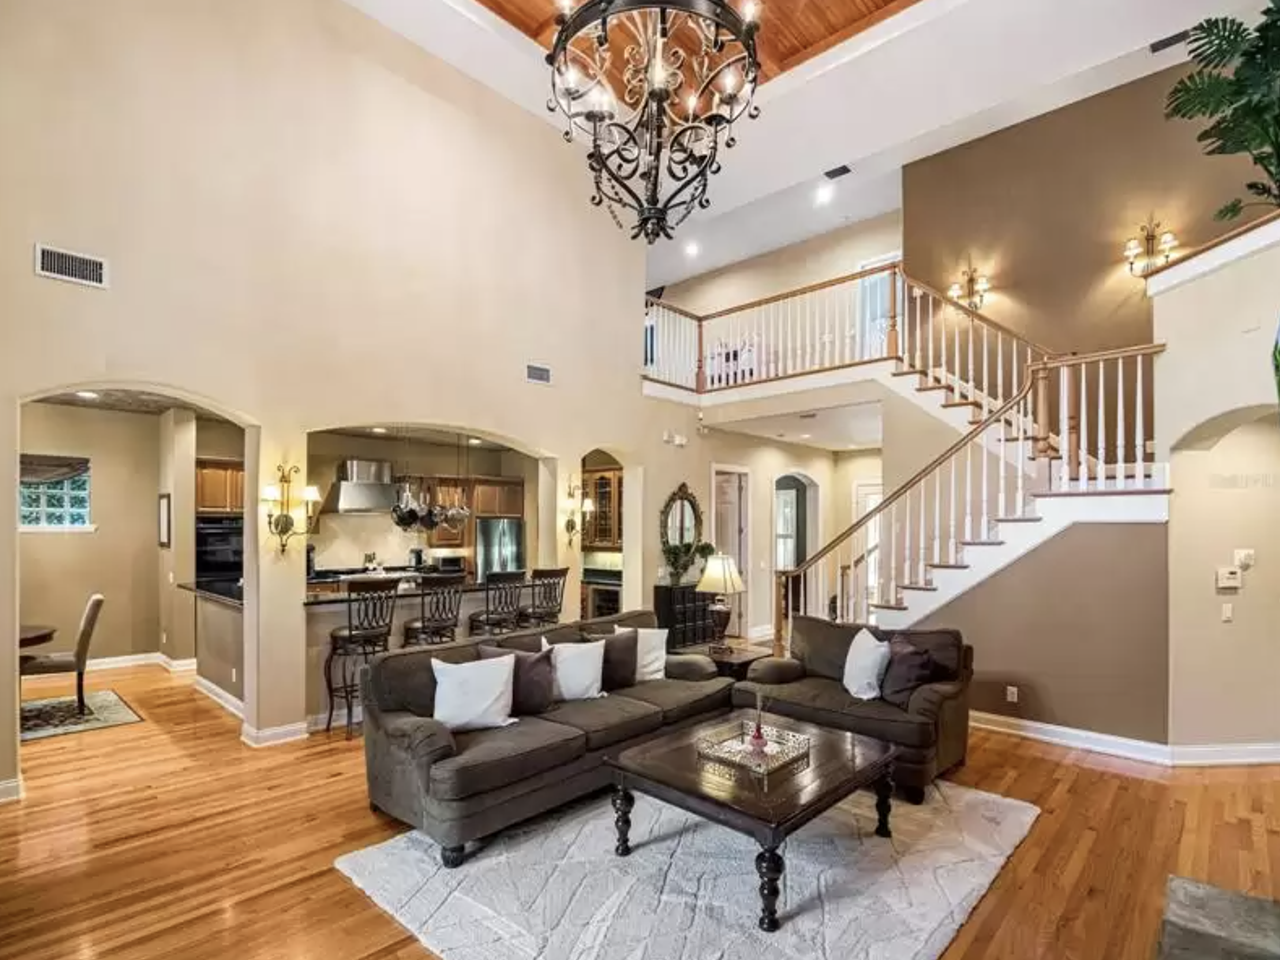 The former Tampa home of MLB pitcher Chris Perez is for sale, and it comes with a stage floor once used by Elvis